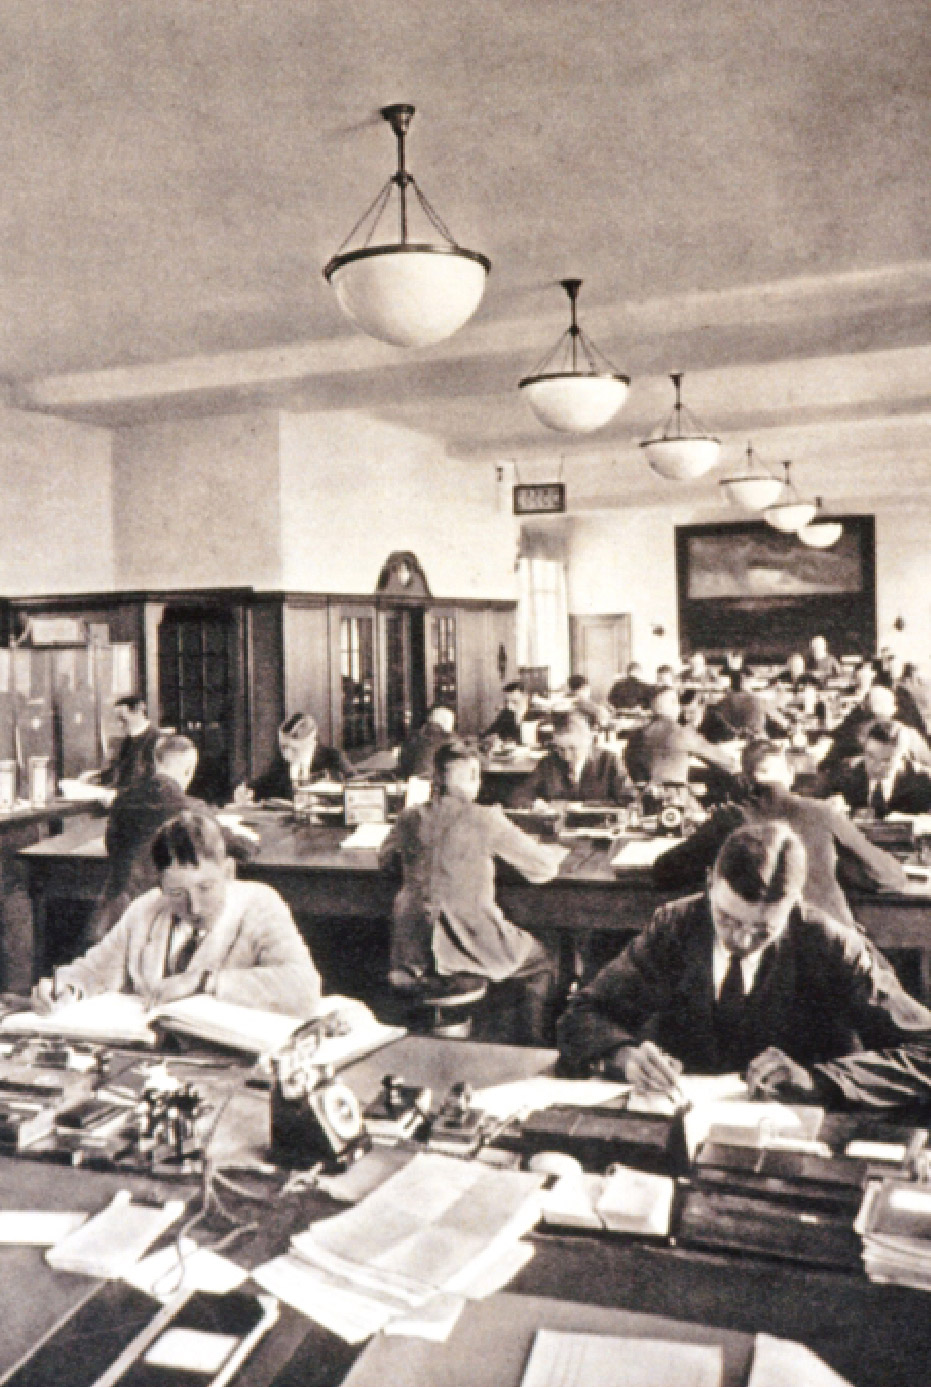 A new office reality 1926